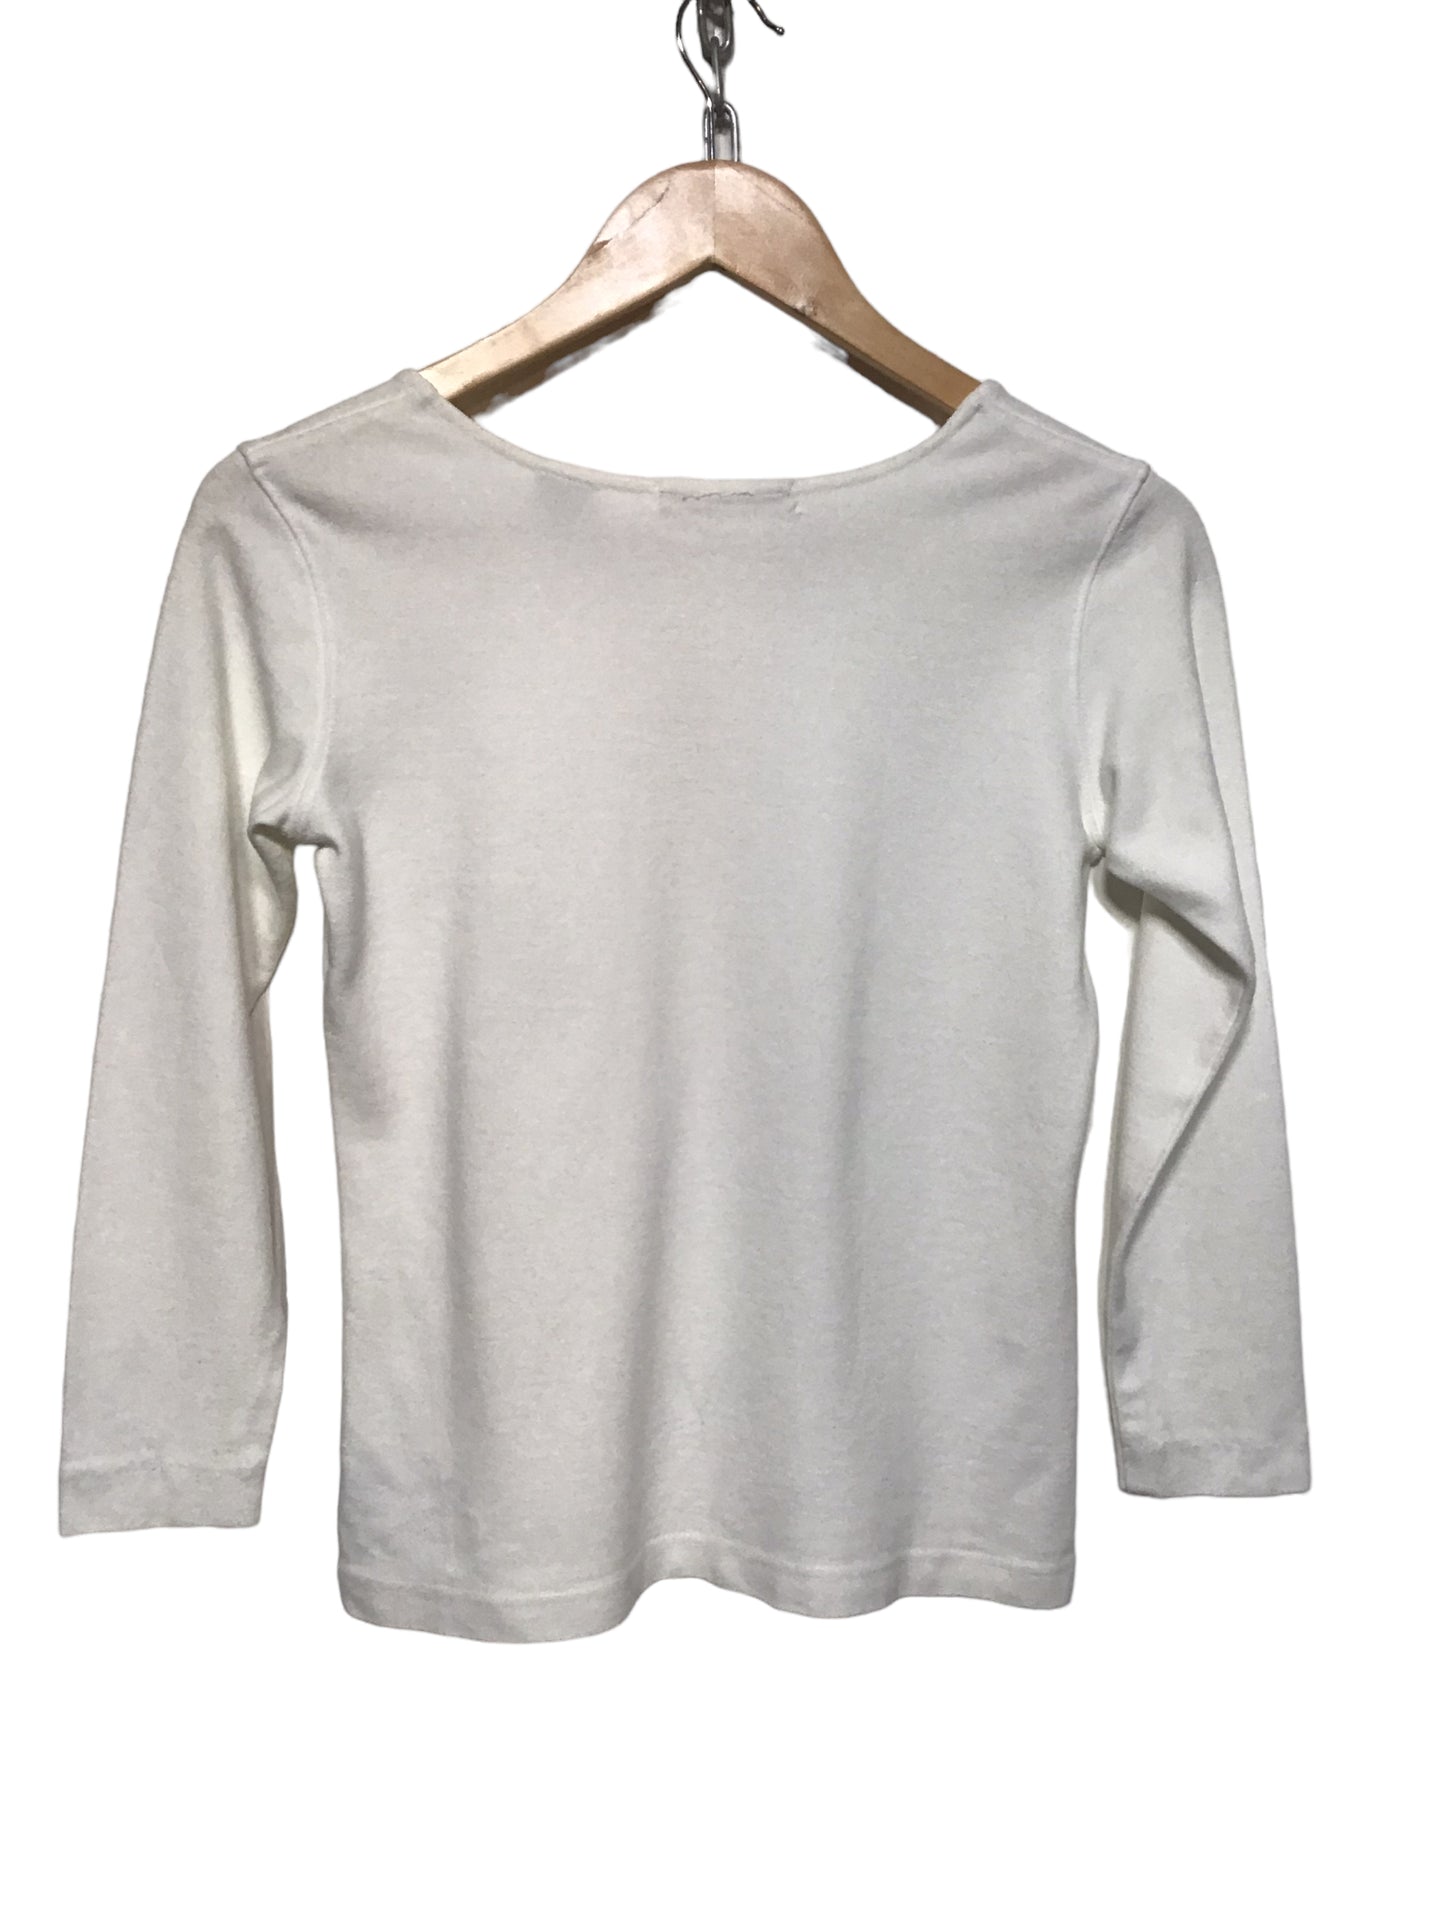 White Long Sleeved Top (Size S)